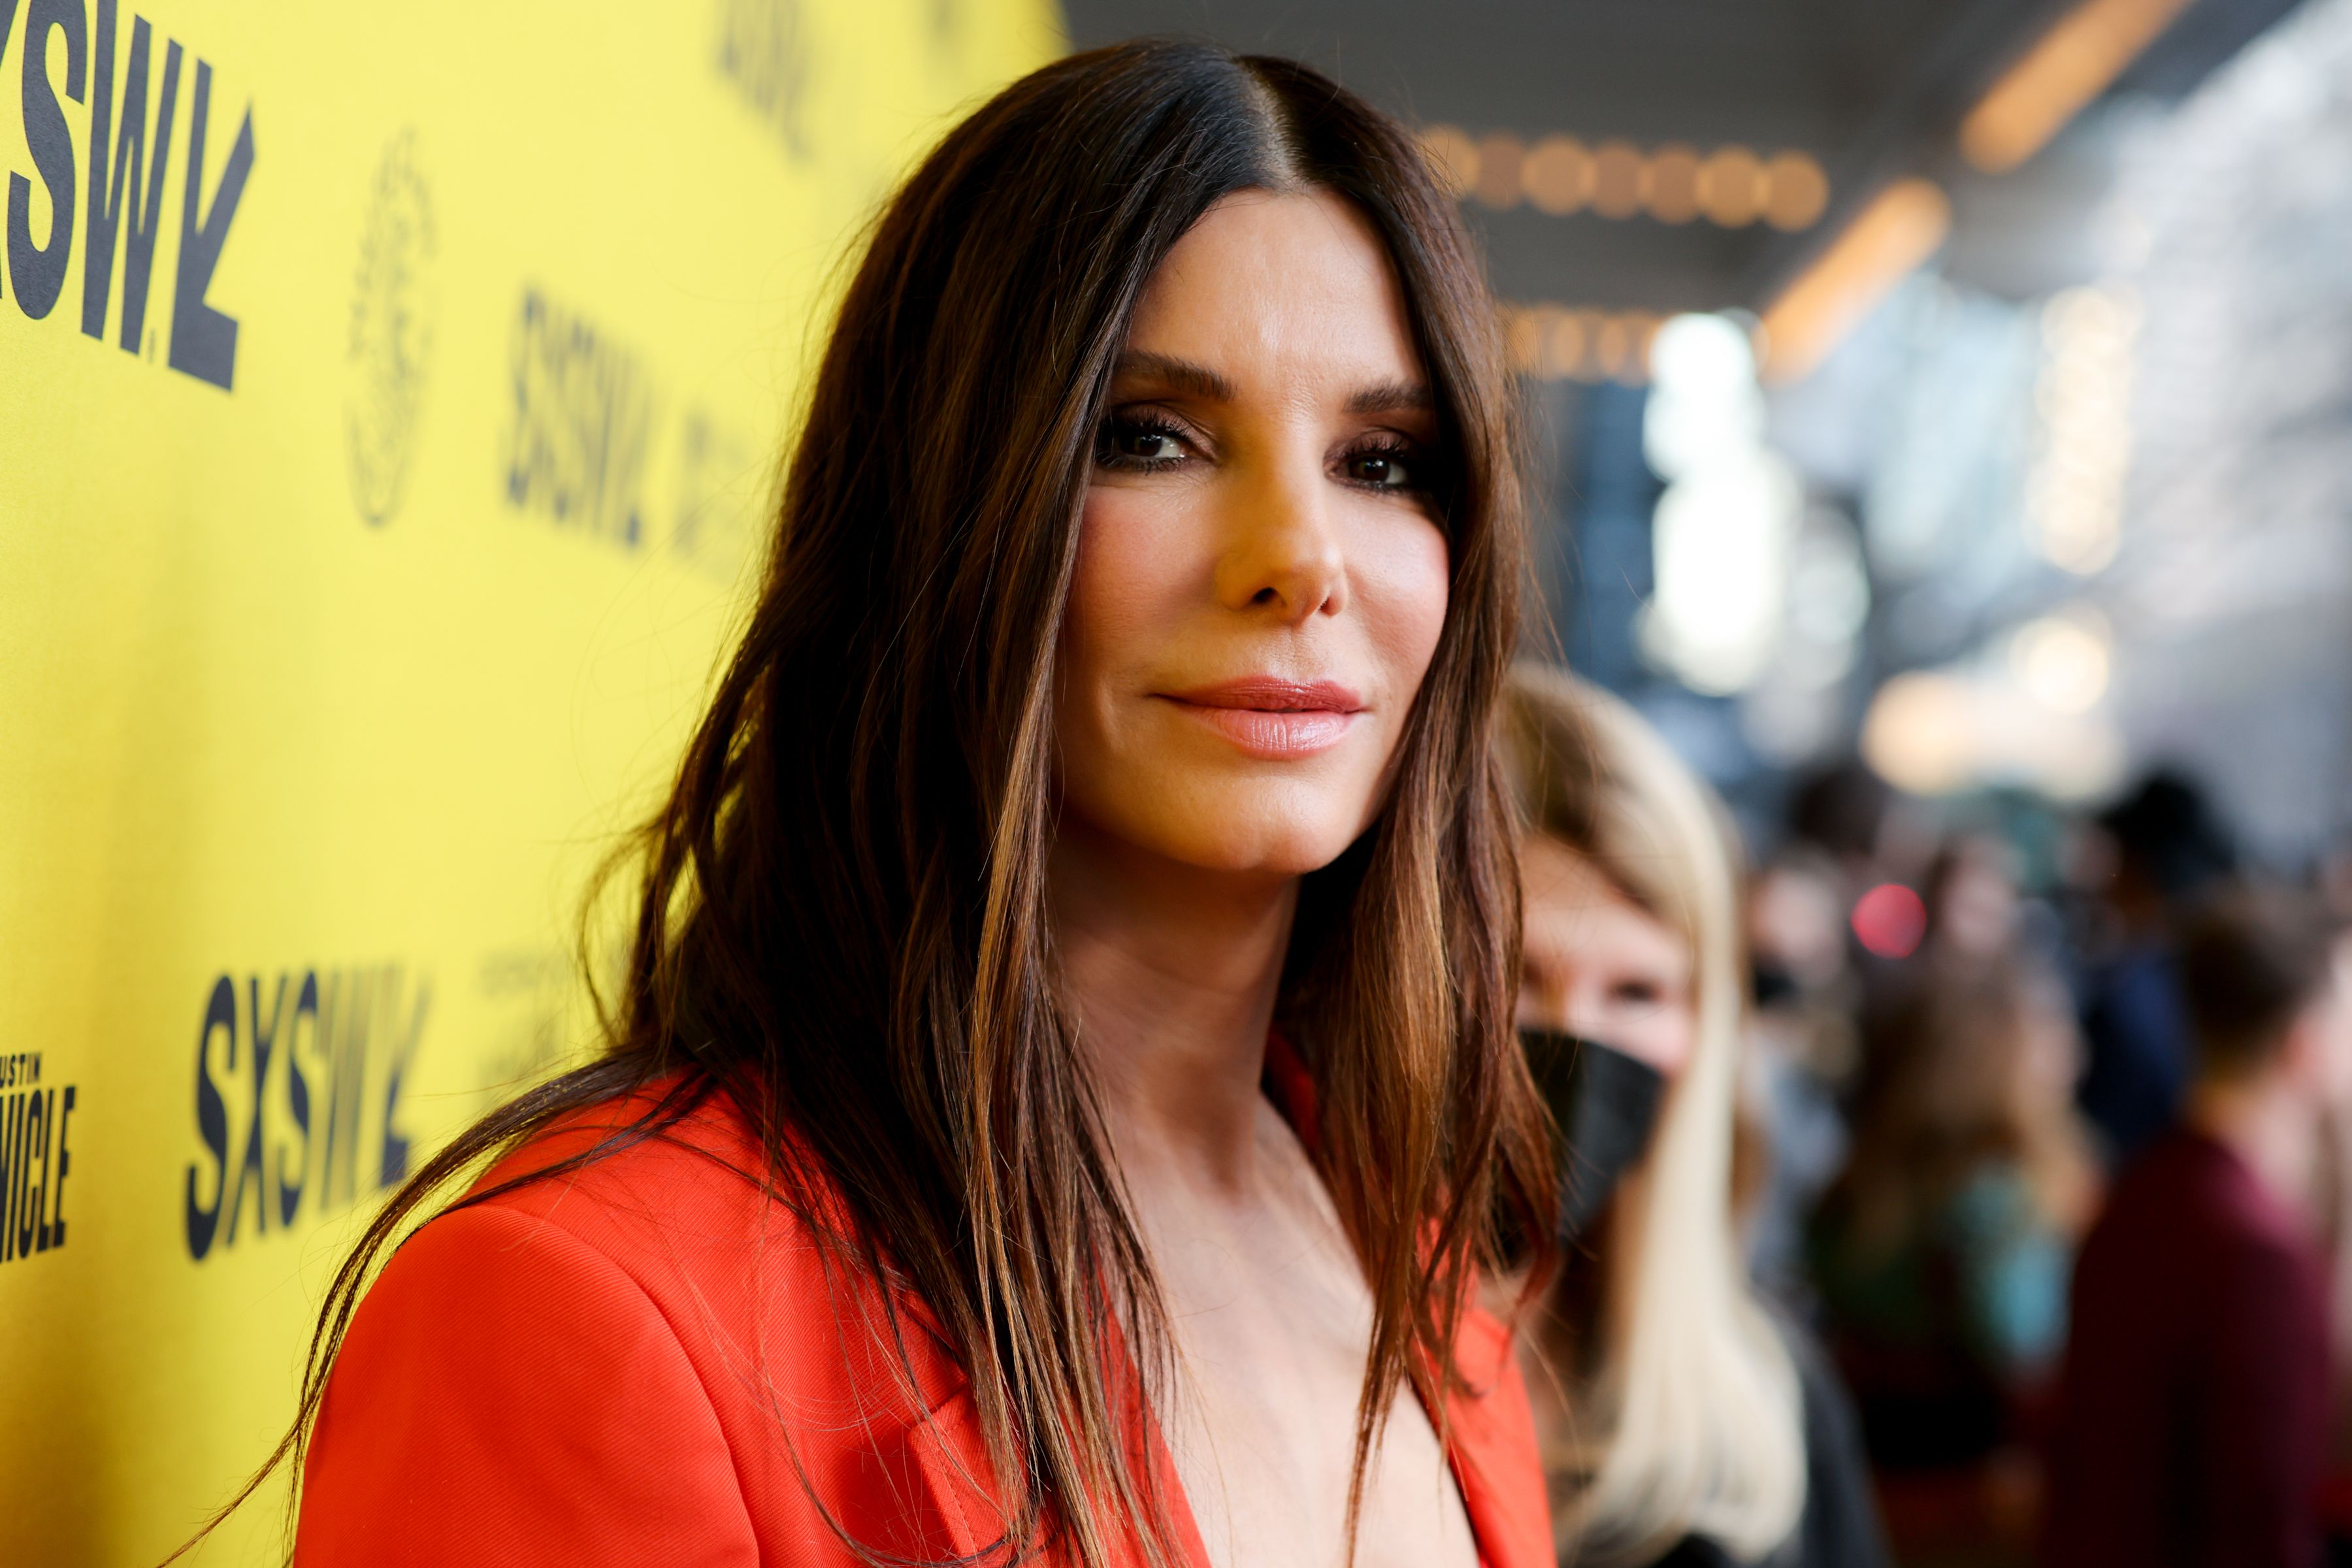 sandra bullock attends the premiere of the lost city during news photo 1657896195